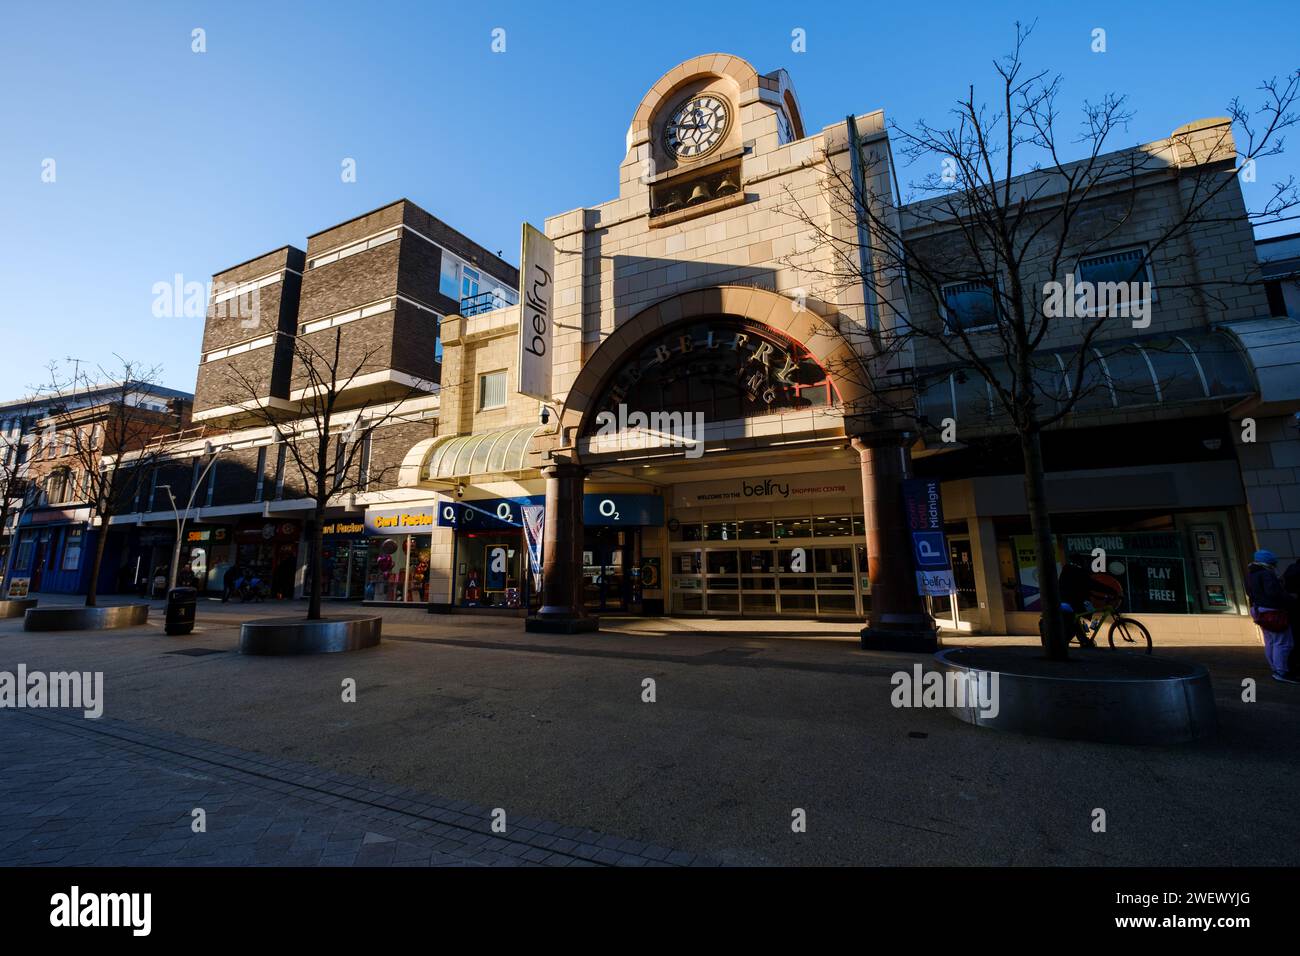 Belfry centre commercial High Street Entrance Redhill Surrey.England. Banque D'Images